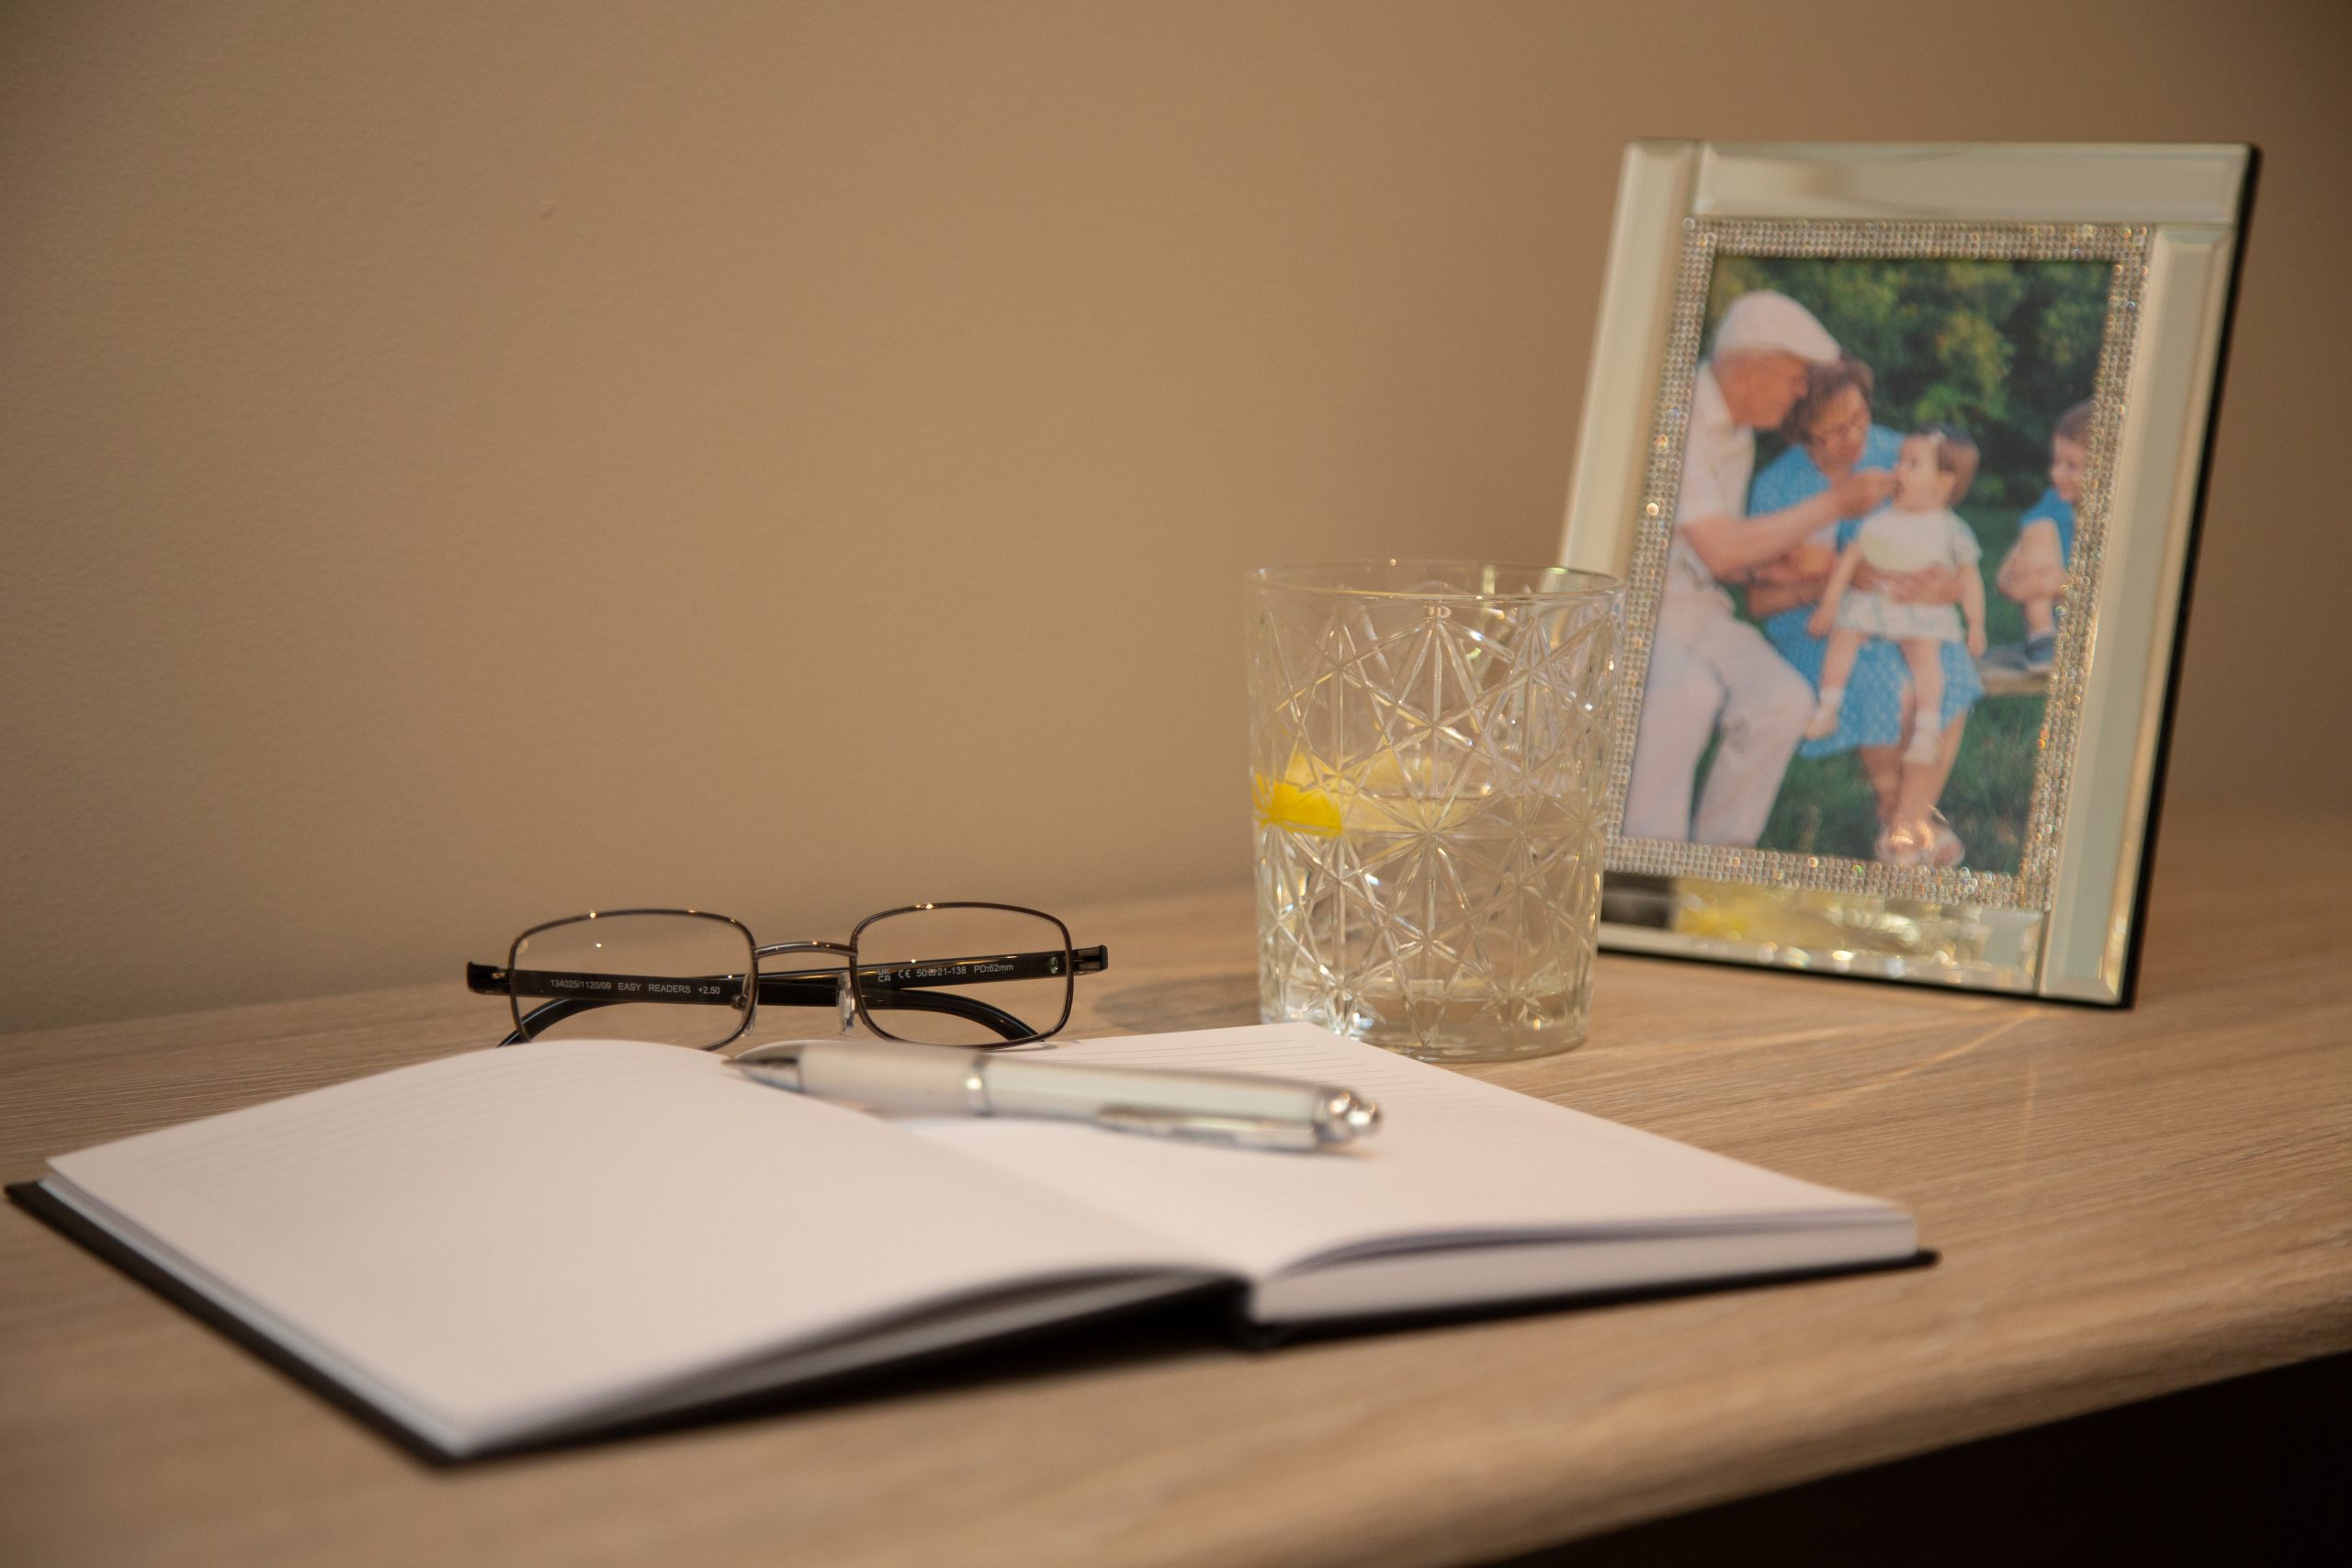 Care home desk with book and photo frame